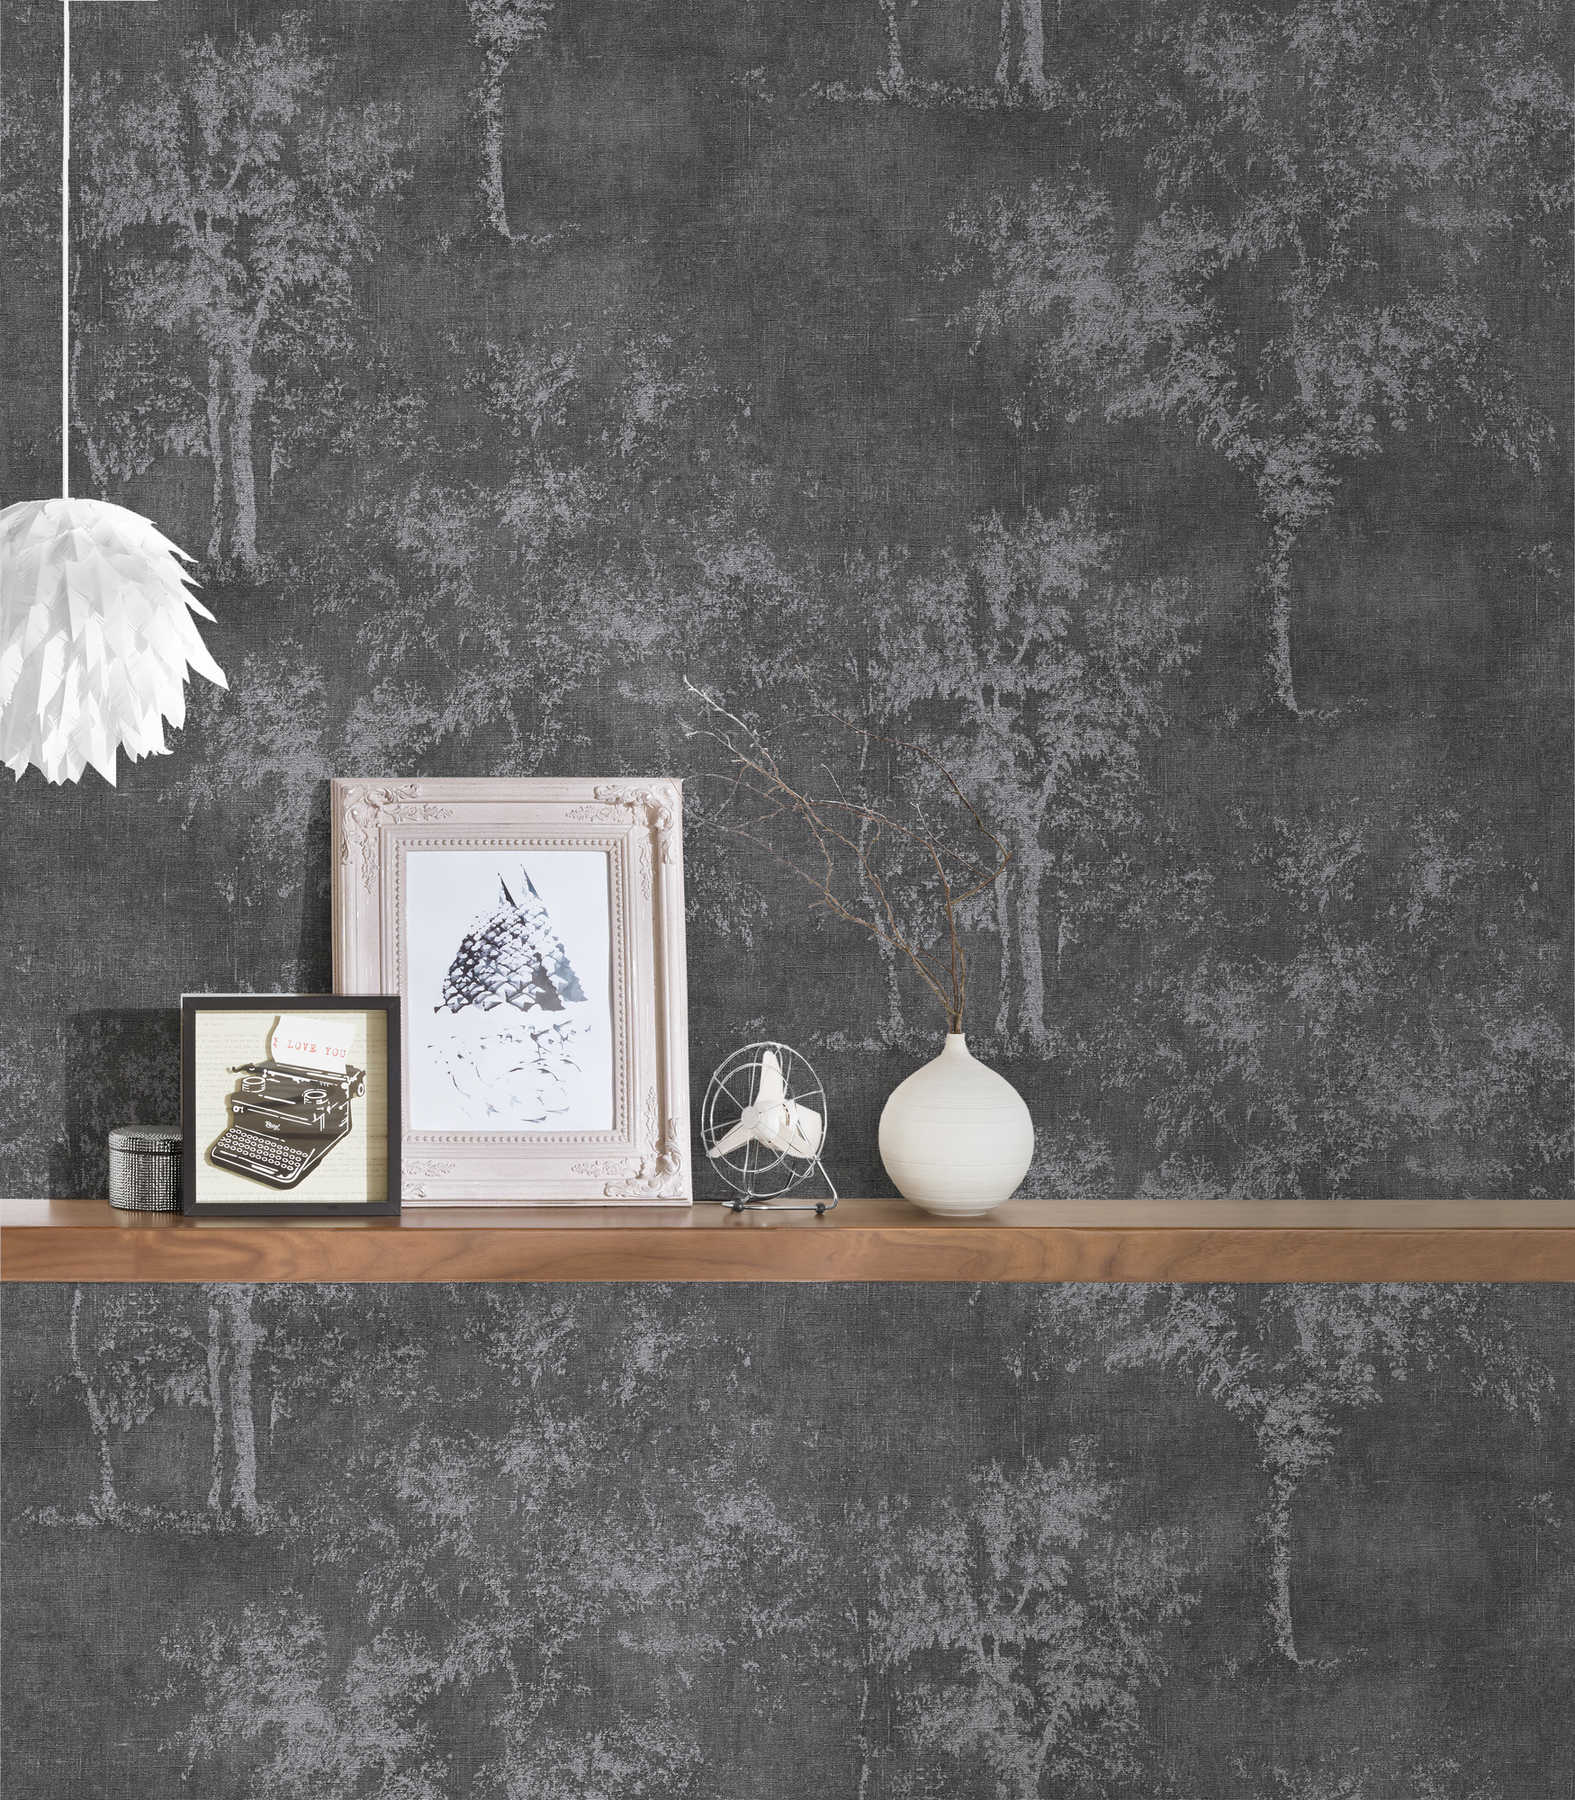             Non-woven wallpaper rustic with texture effect & tree motif - grey
        